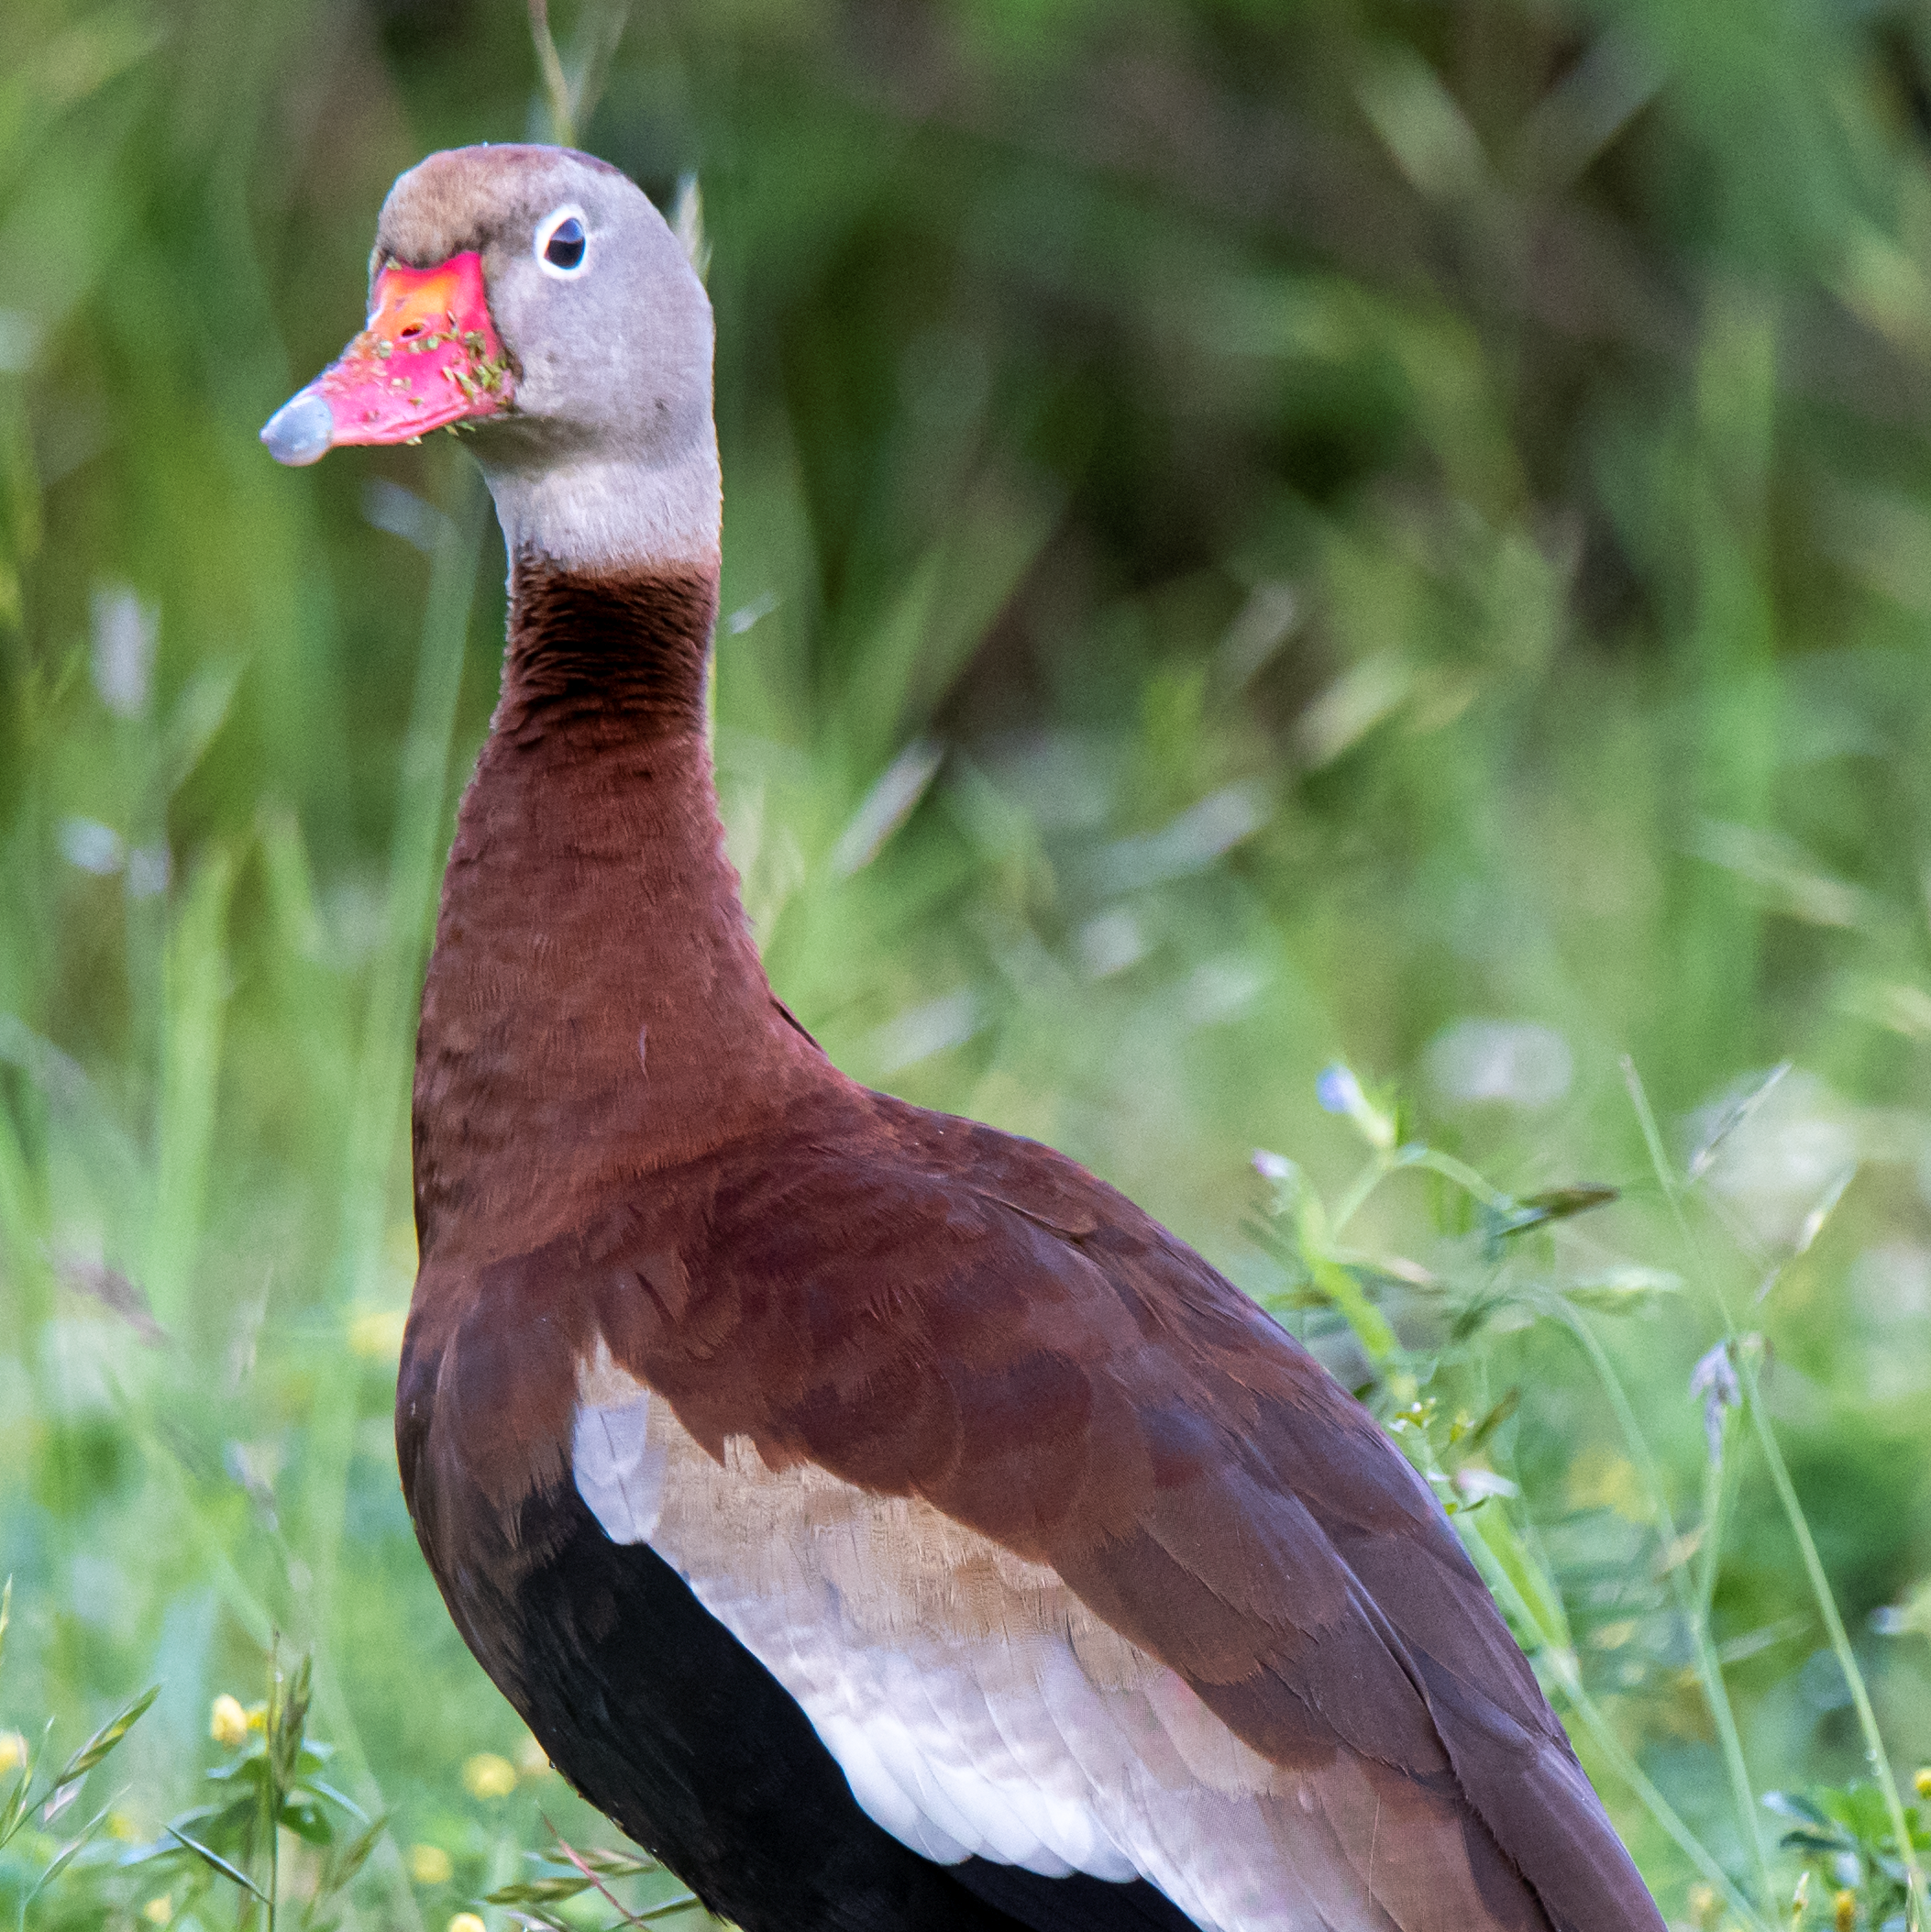 Black Bellied Whistling Duck stands in a green field.